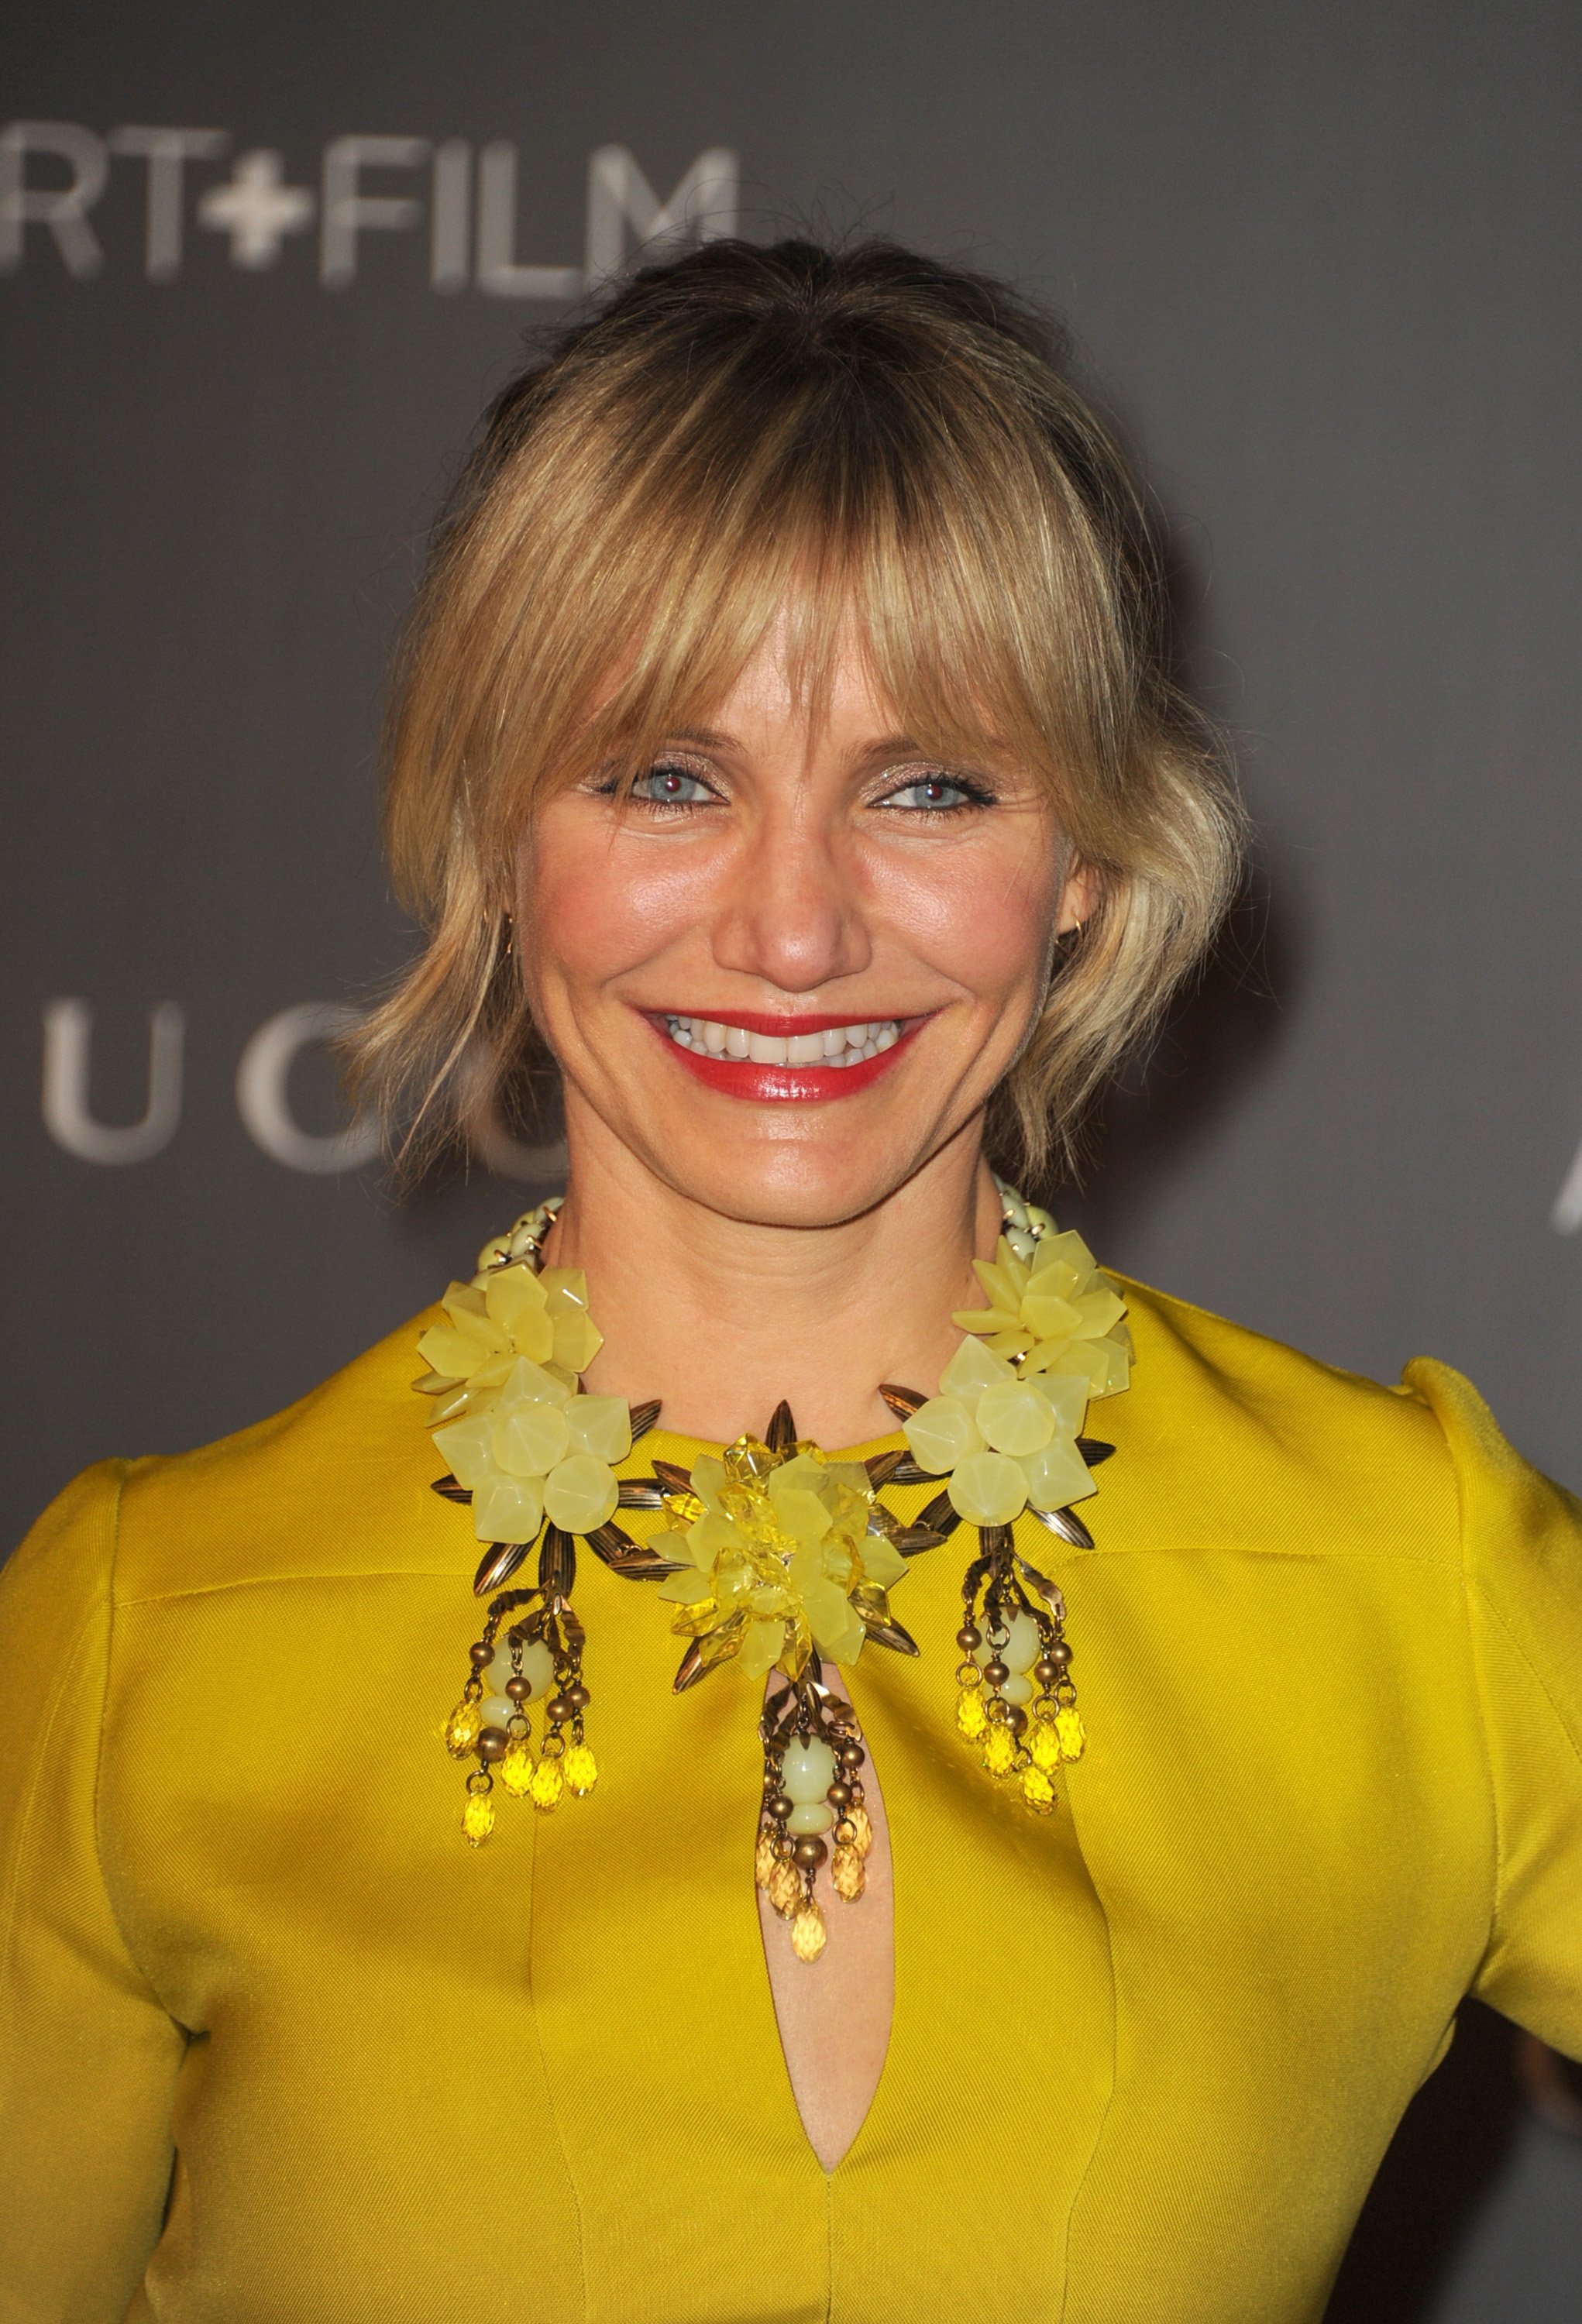 Cameron Diaz at LACMA 2012 Art + Film Gala on October 27, 2012, in Los Angeles, California. | Source: Getty Images